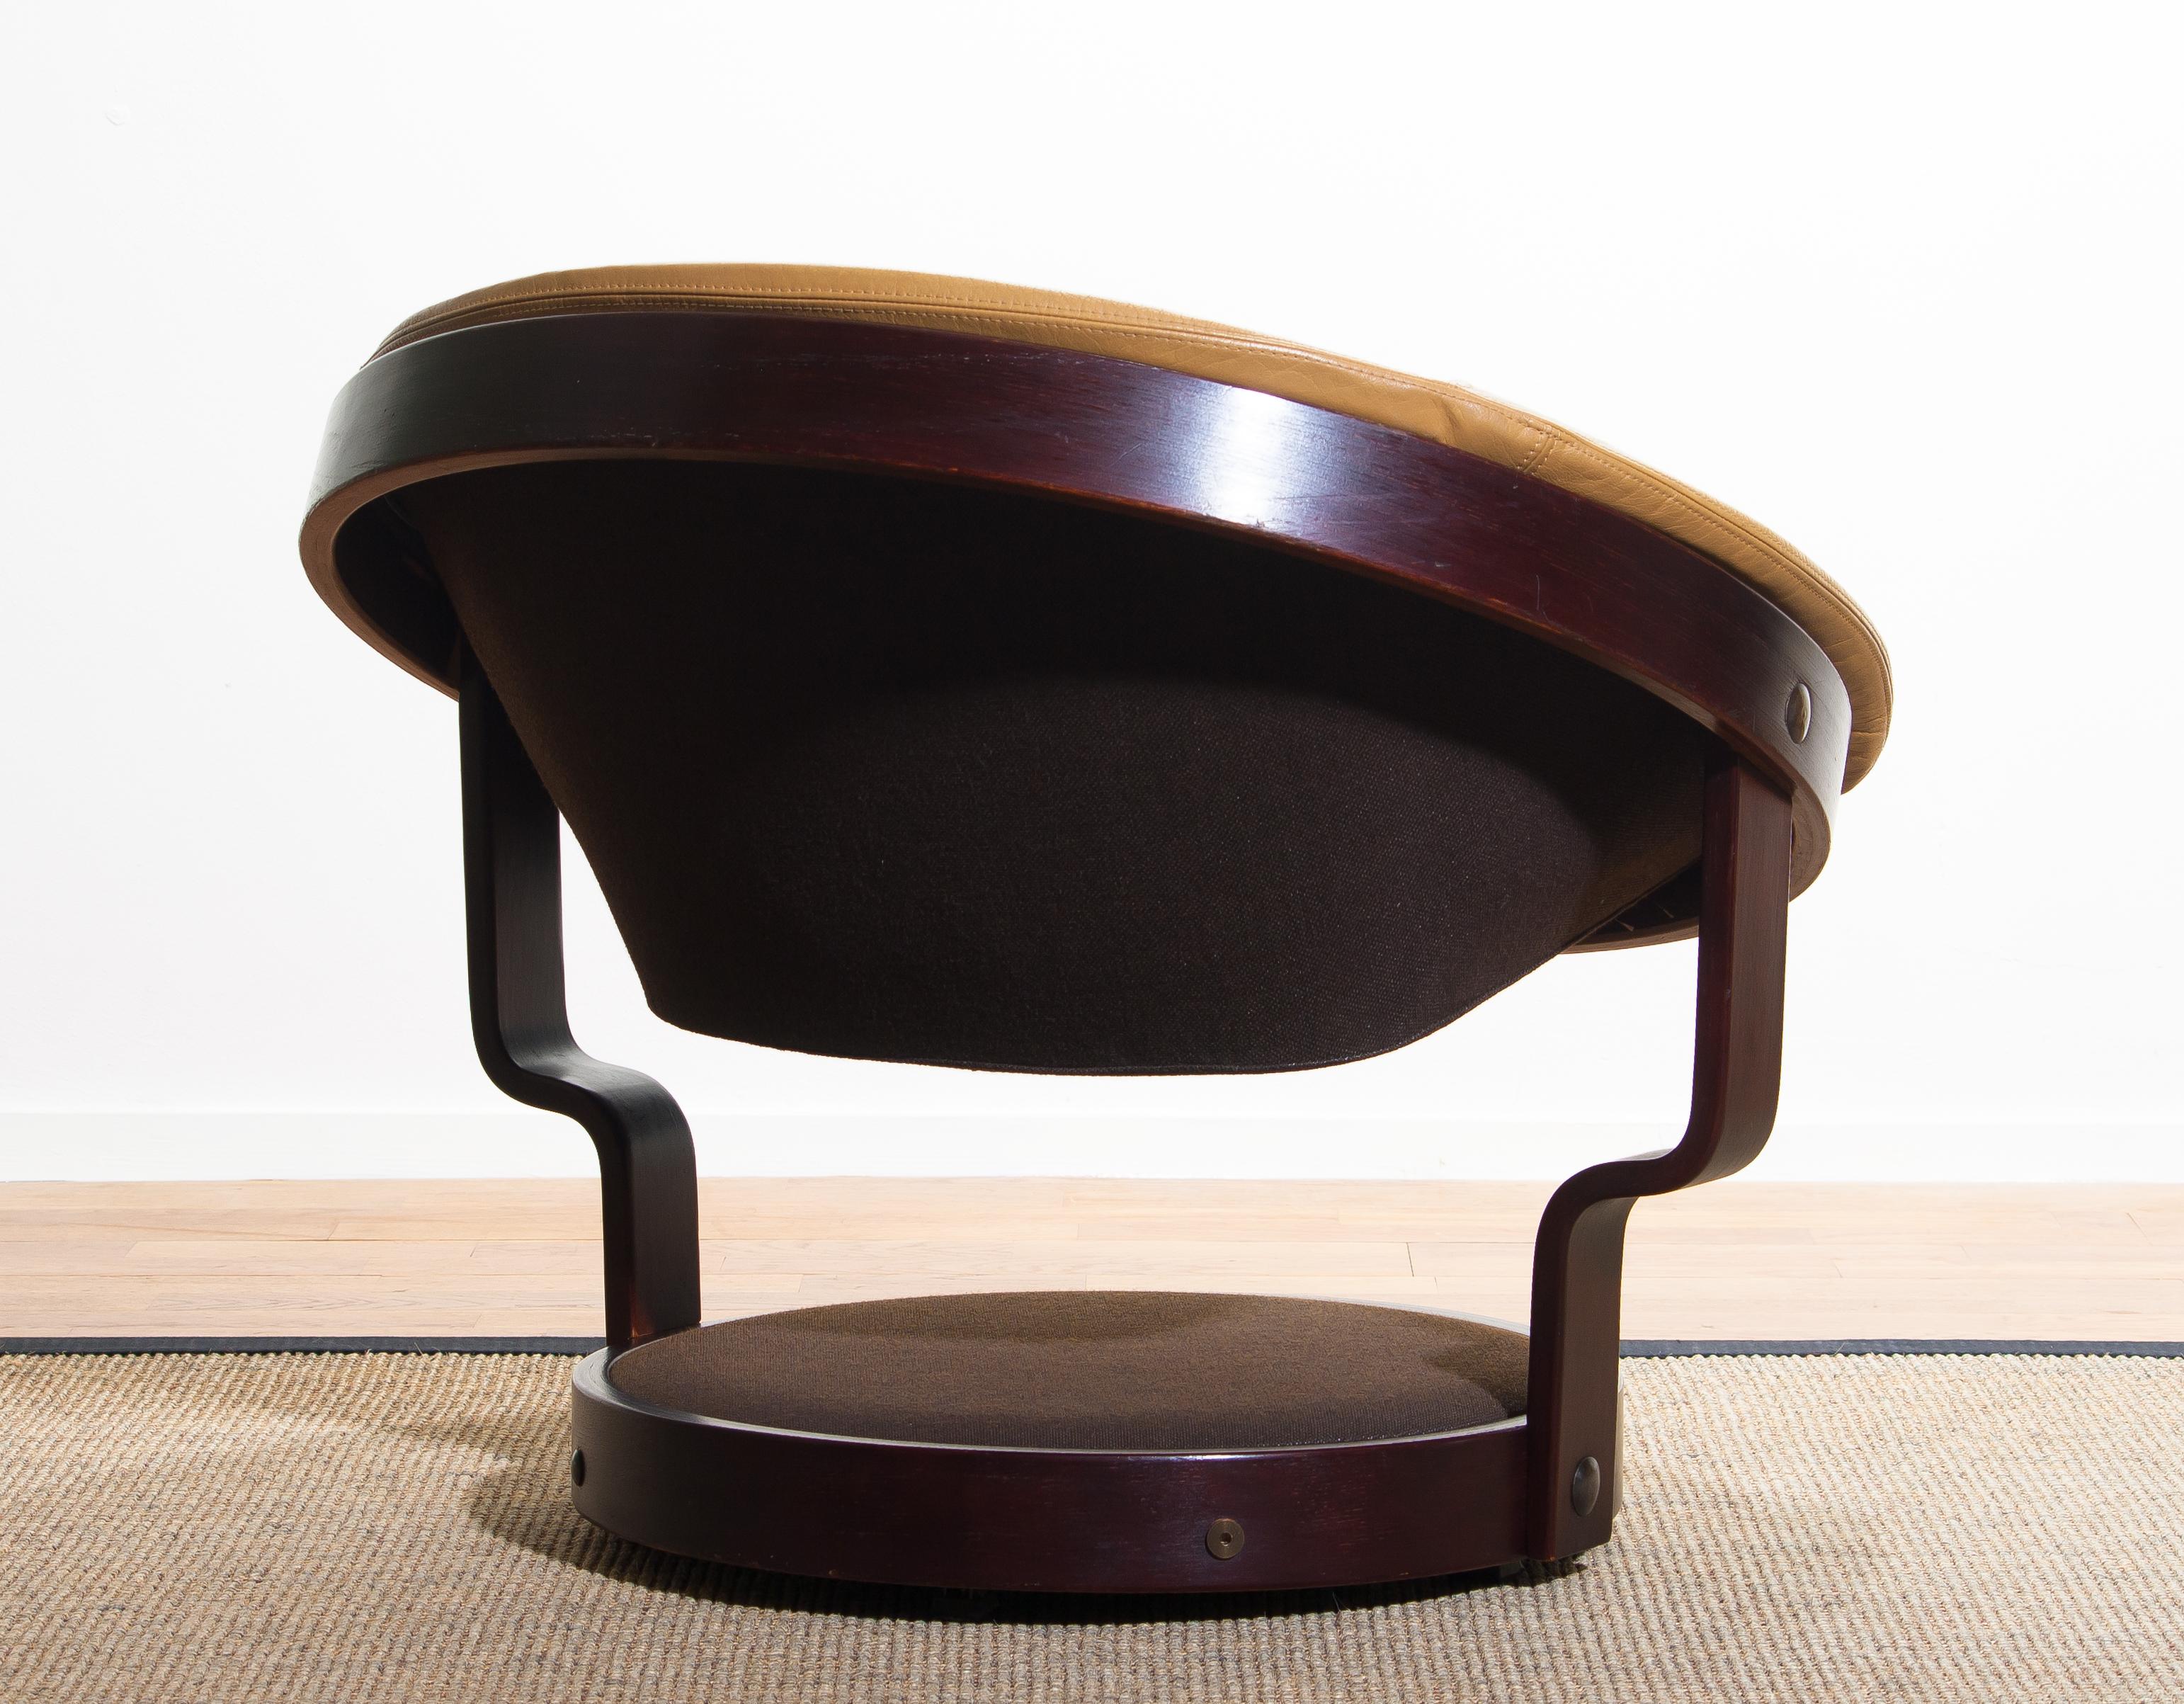 1970s Scandinavian Circle Shaped Swivel Chair by Oddmund Vad in Camel Leather In Good Condition In Silvolde, Gelderland